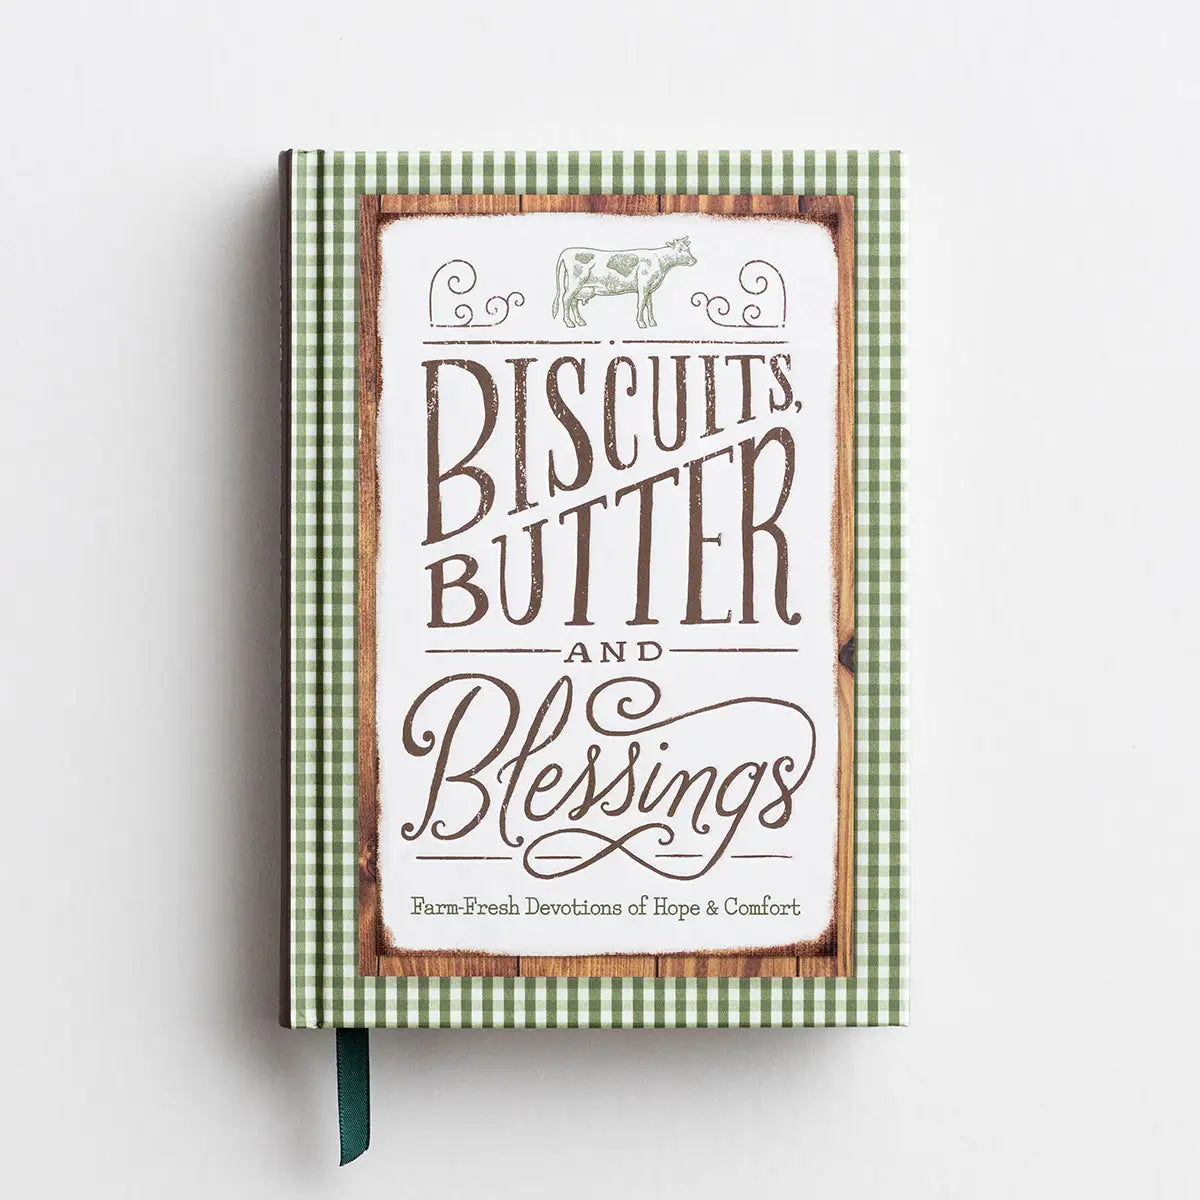 Biscuits, Butter and Blessings